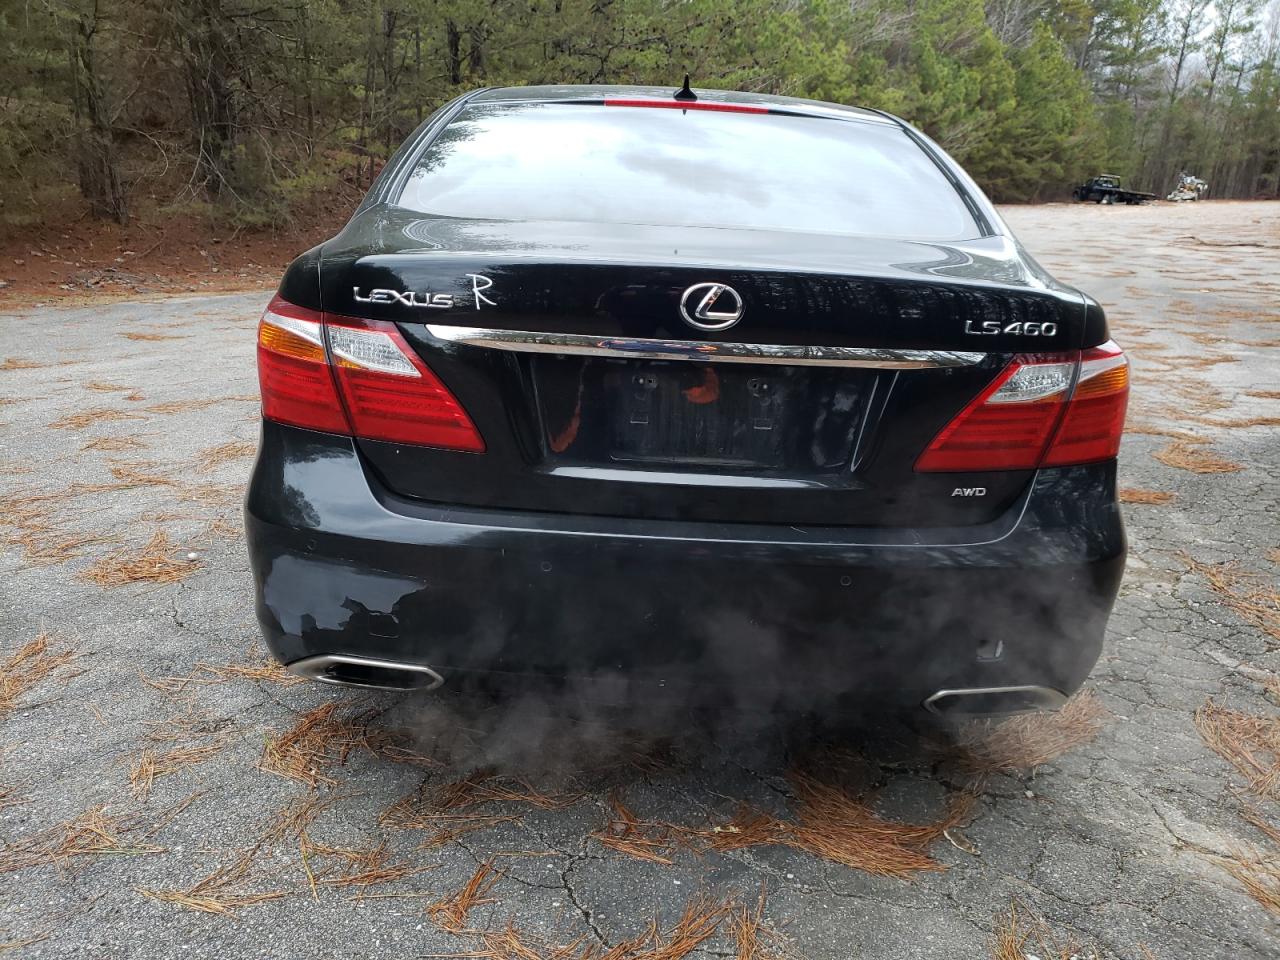 JTHCL5EF9A5****** Salvage and Repairable 2010 Lexus LS 460 in Alabama State